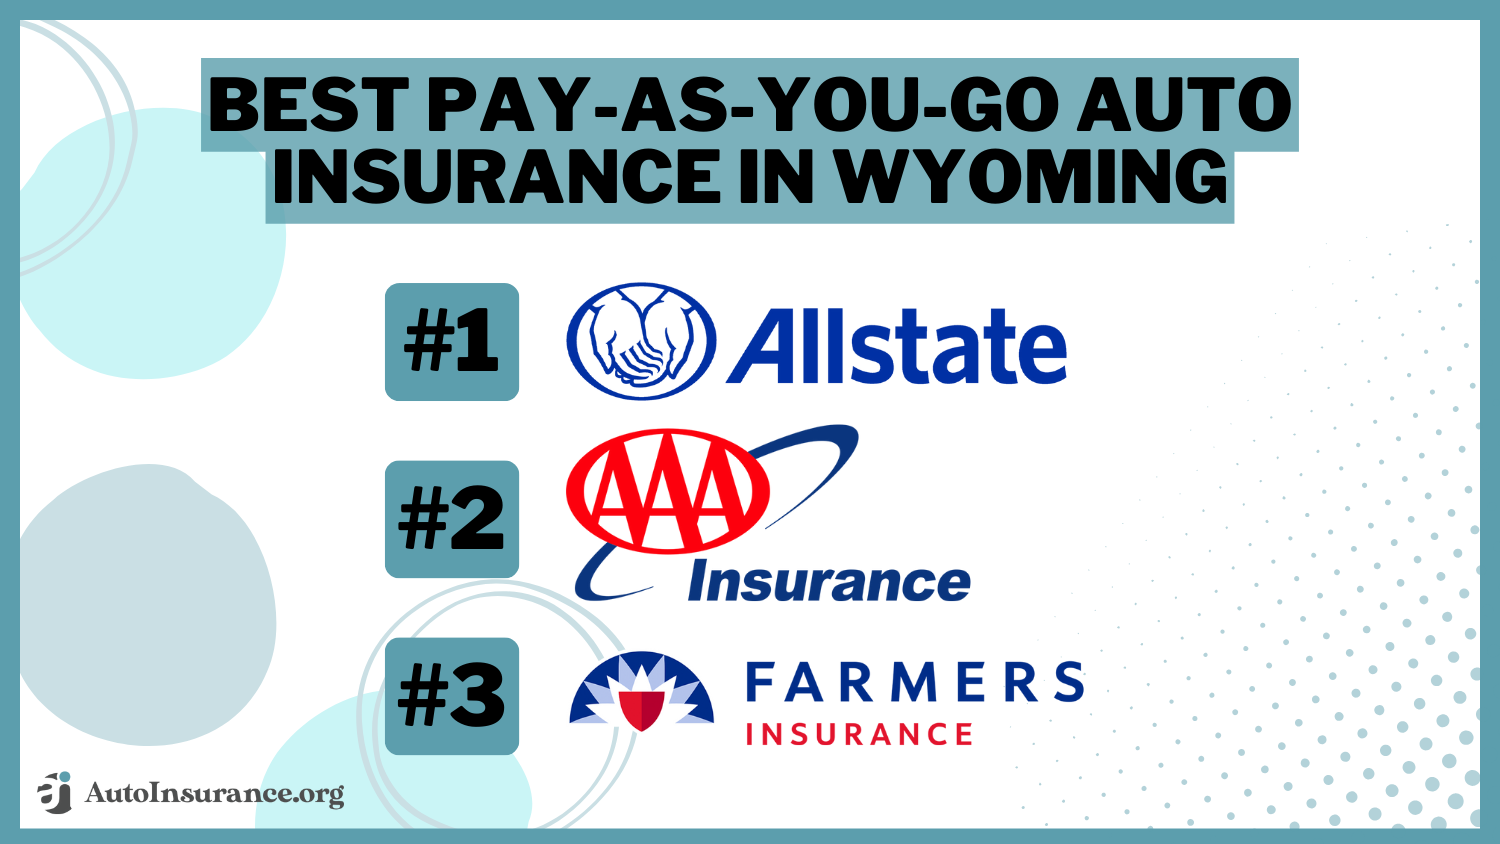 Best Pay-As-You-Go Auto Insurance in Wyoming: Allstate, AAA, Farmers